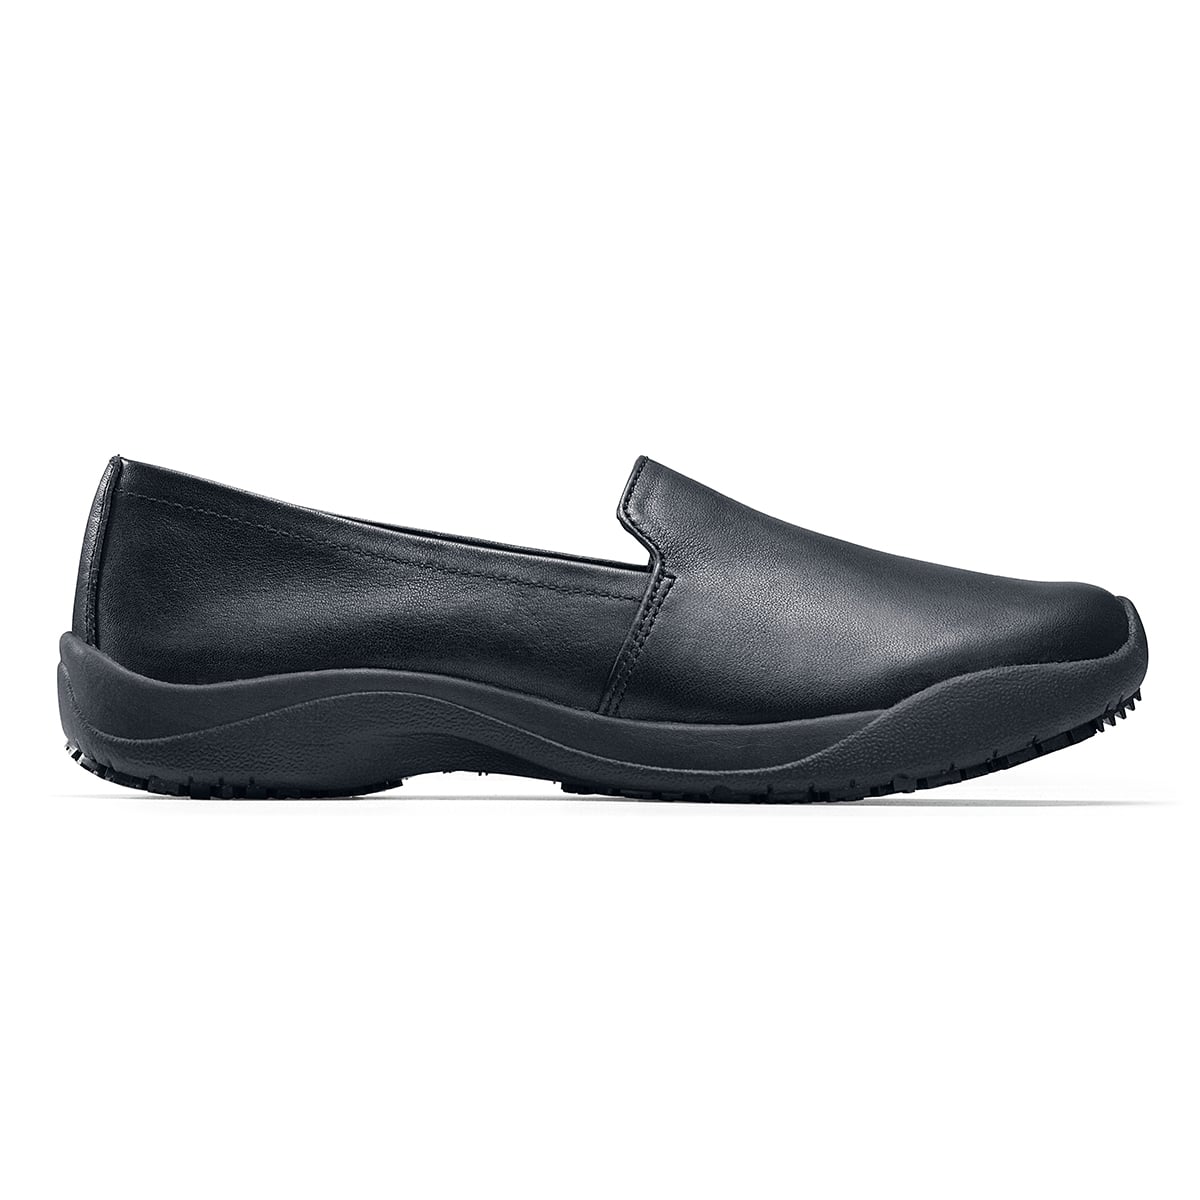 The Jasmine Black by Lila from Shoes for Crews are slip-resistant, casual, lightweight and water-resistant shoes, seen from the right.